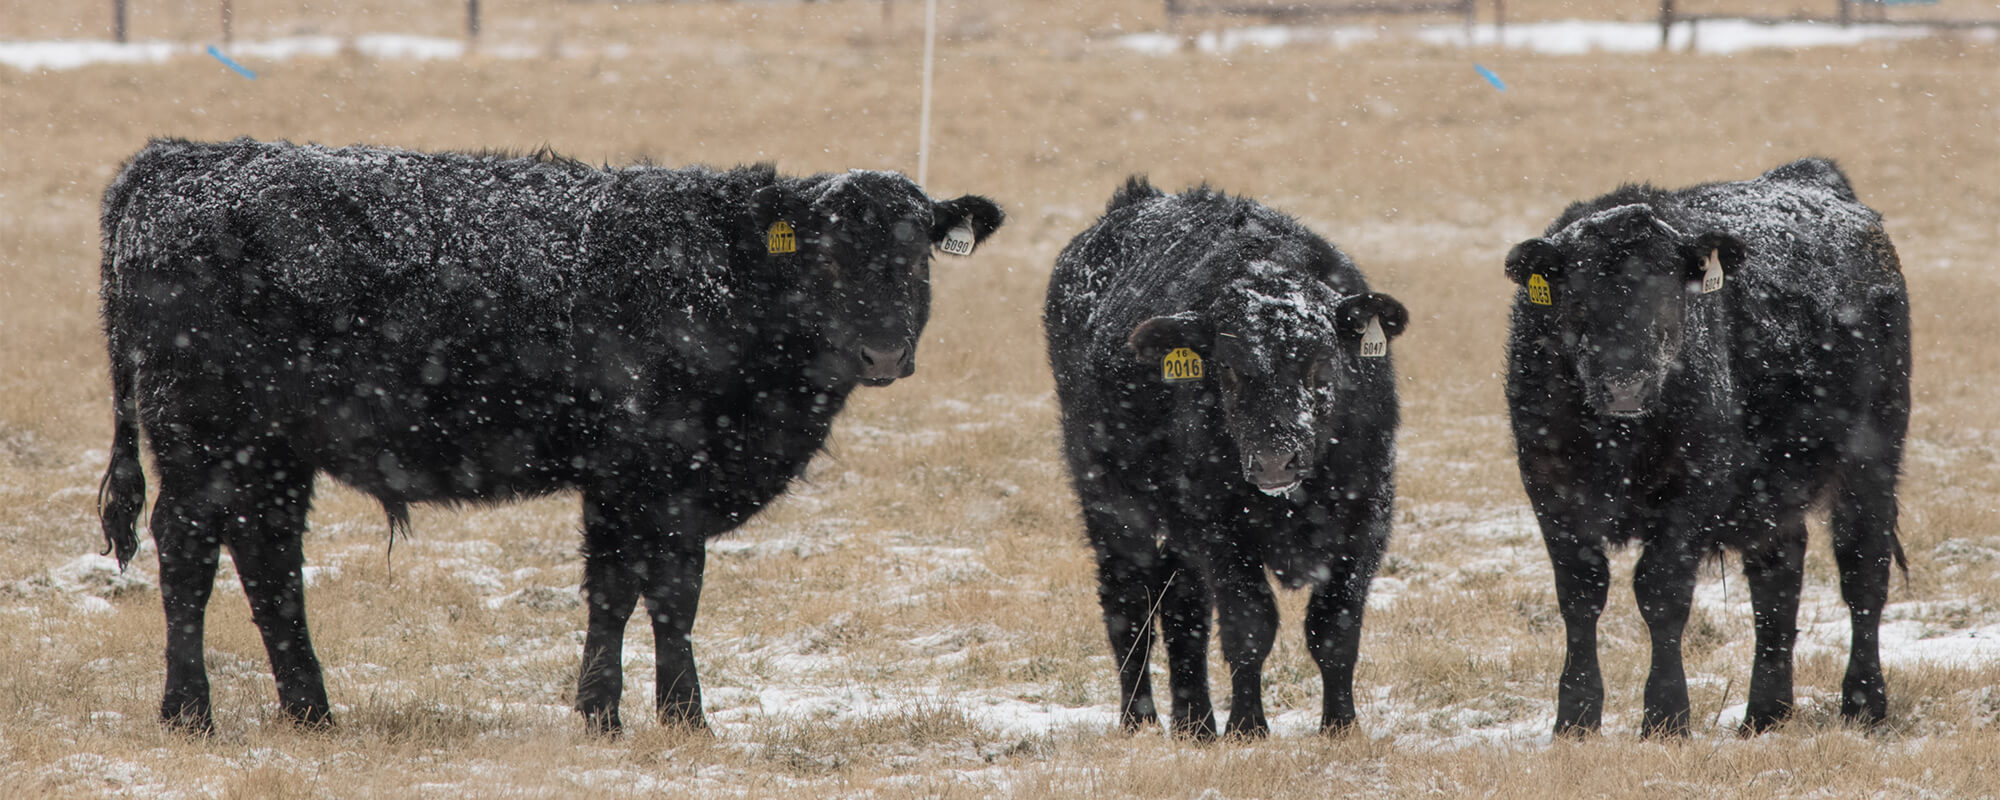 Cows in cold weather